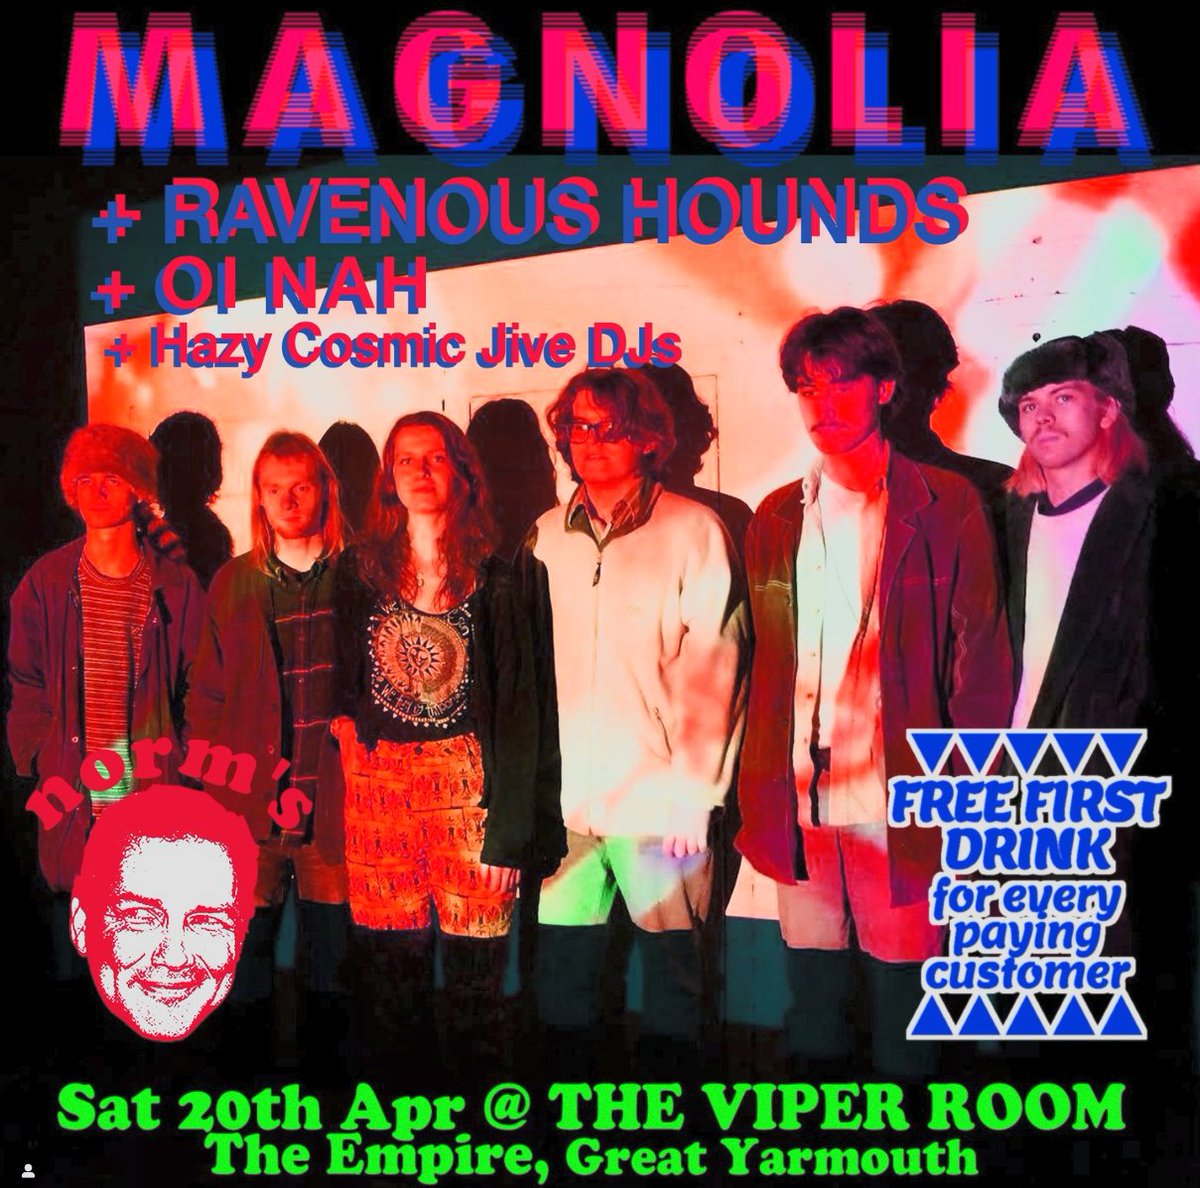 First of a couple of great upcoming gigs this month, back at the incredible Viper Room in Gt Yarmouth for Norm's, supporting Magnolia for their album launch...